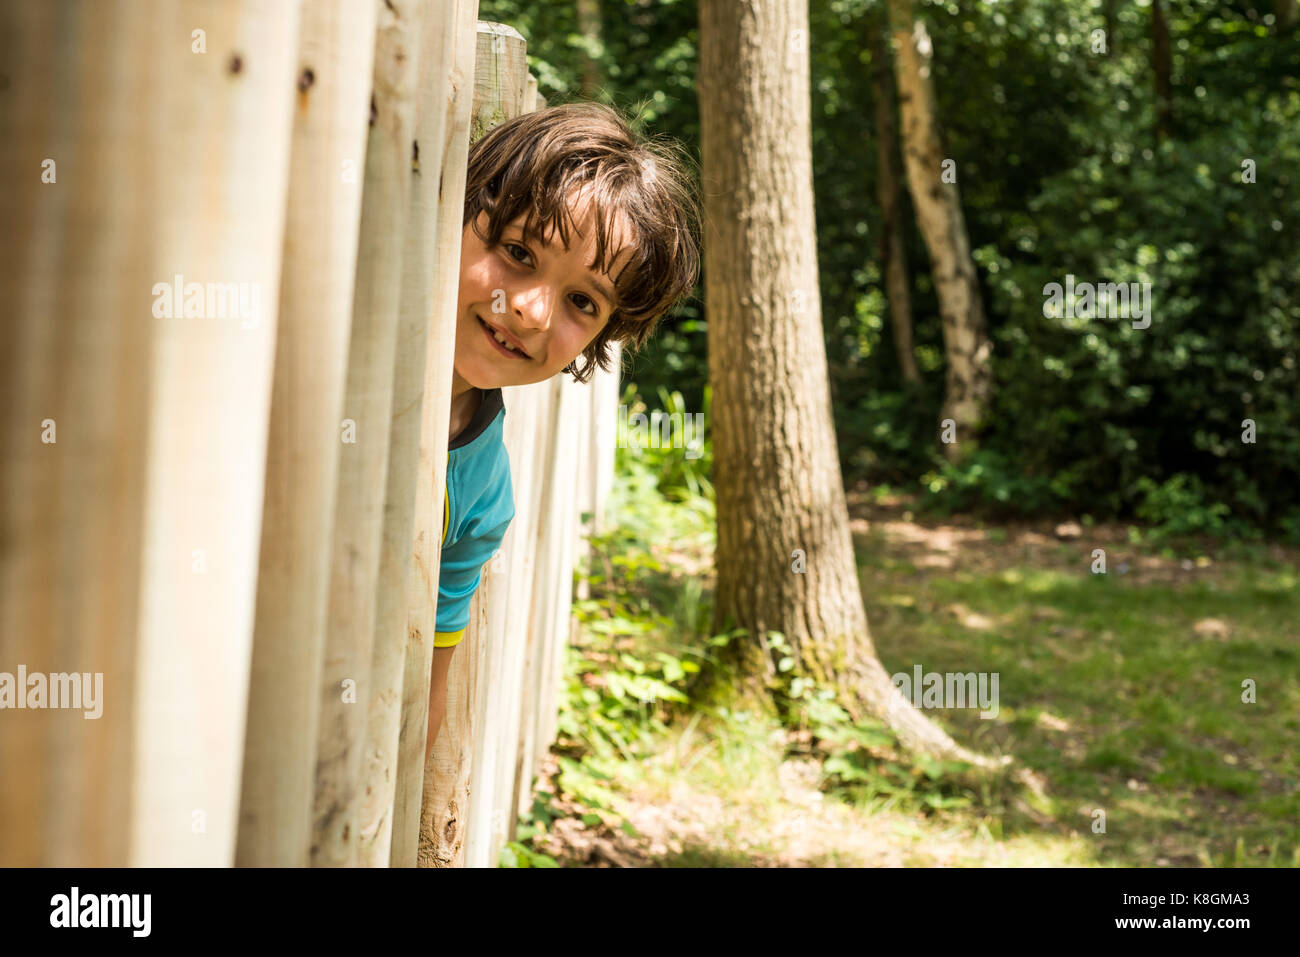 Young boy peering out from wooden fence Stock Photo